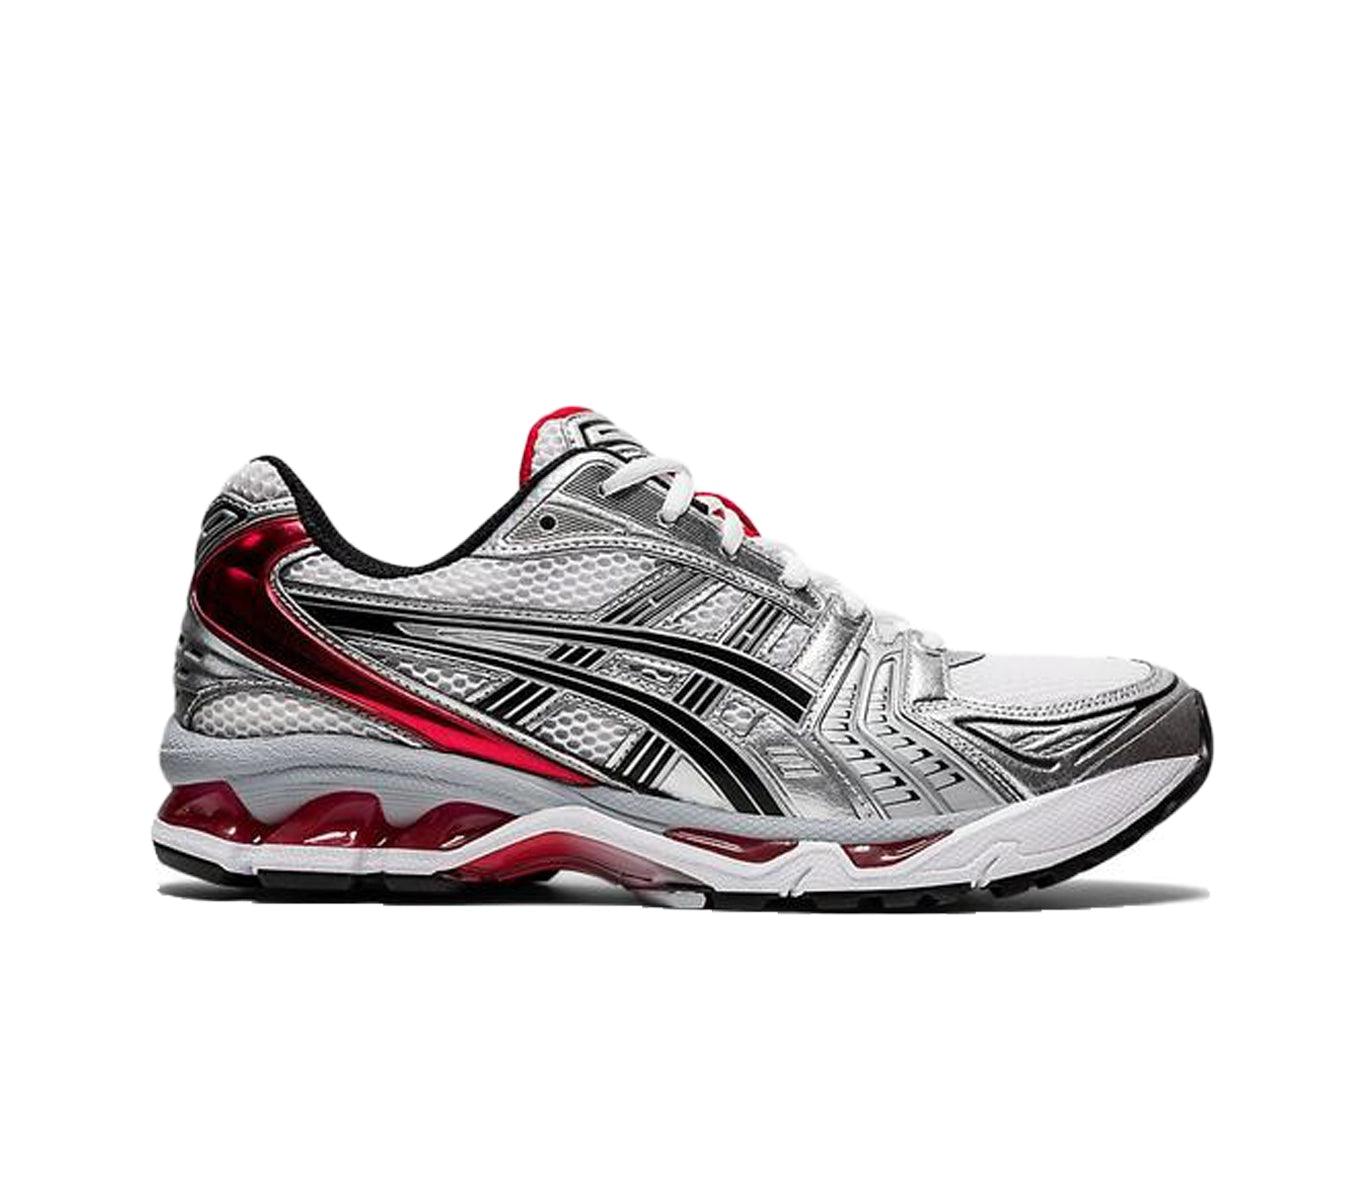 Asics Gel-Kayano 14 - White/Classic Red - Shoes